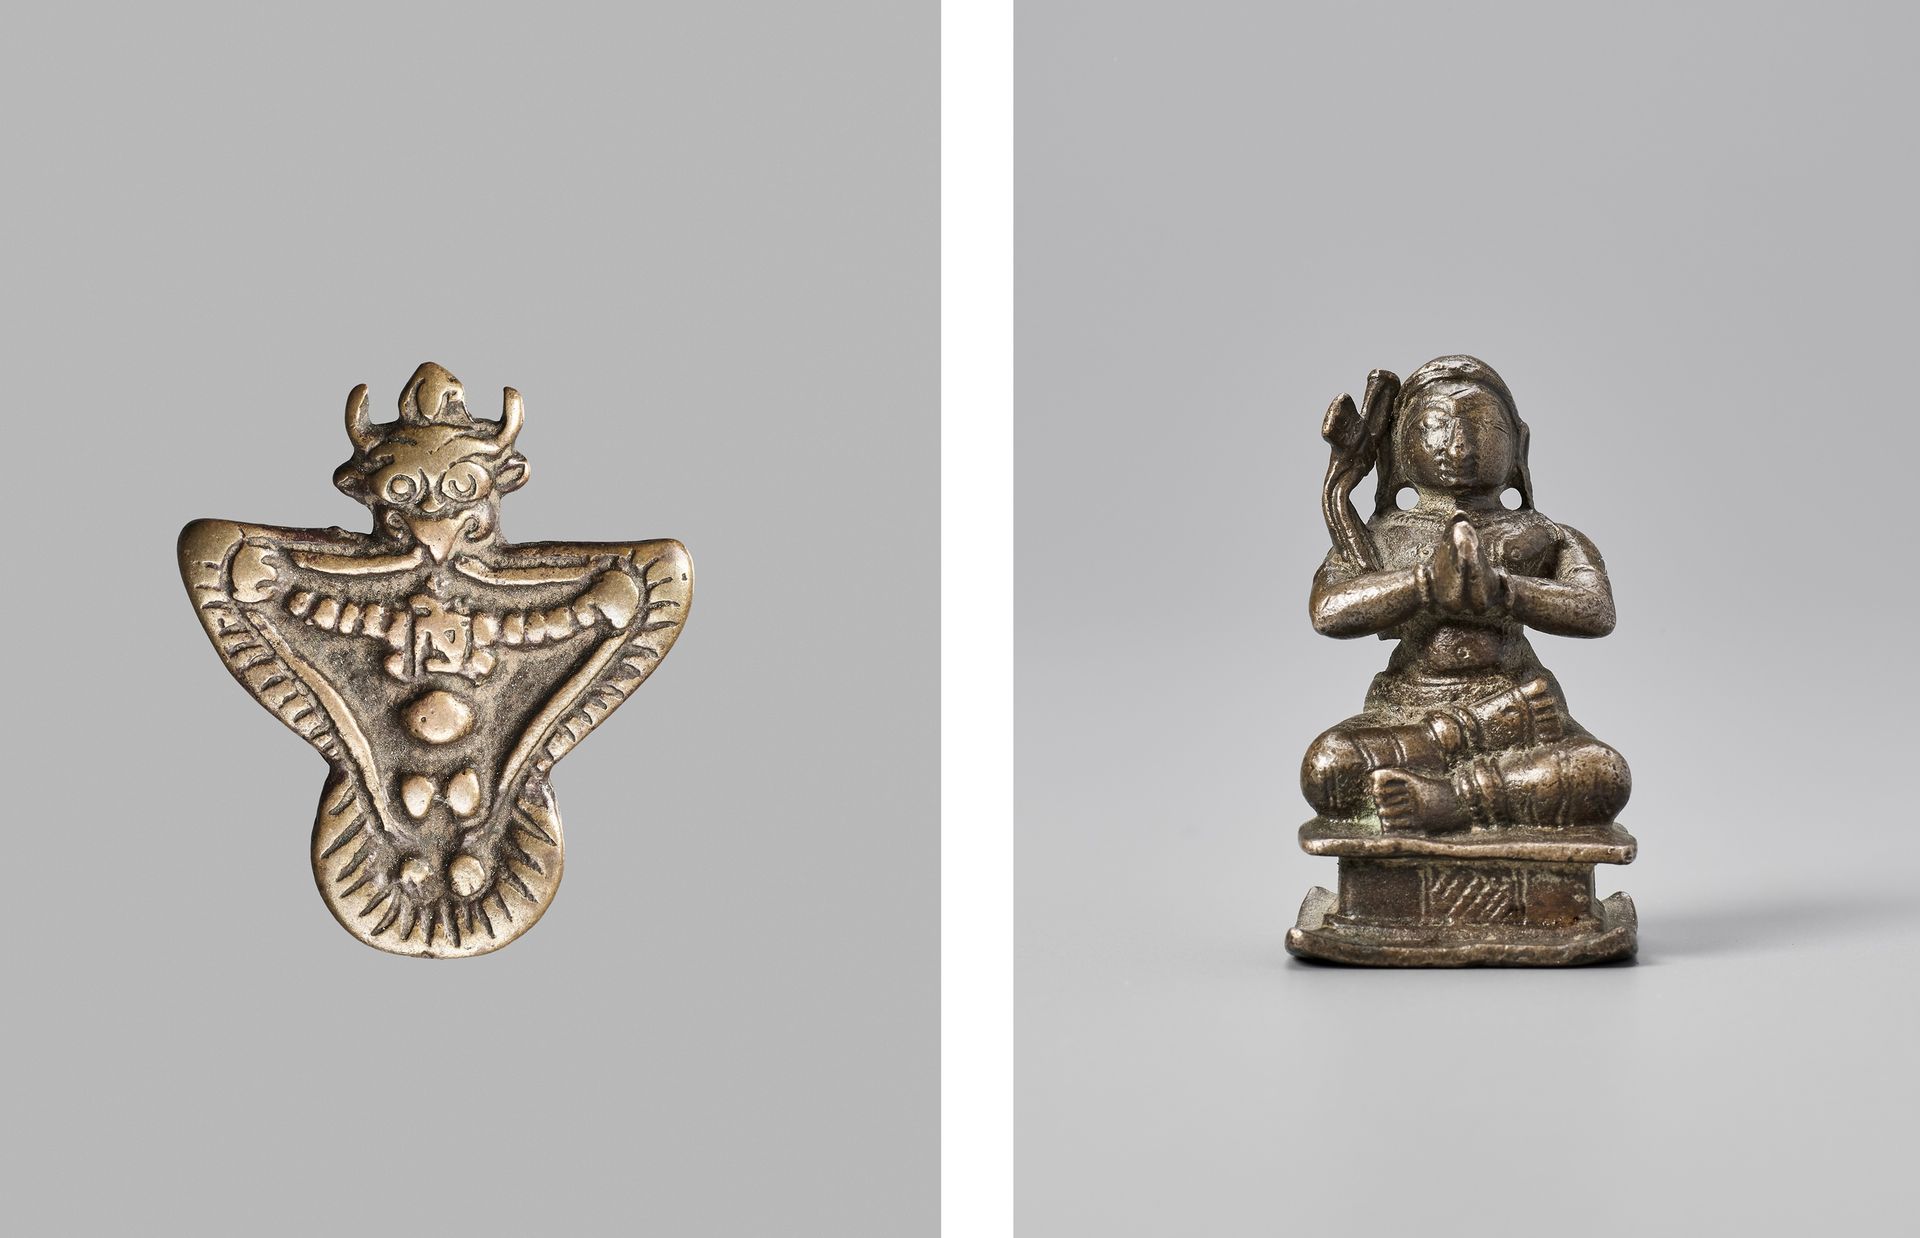 TWO SMALL INDIAN BRONZE FIGURES, 19TH CENTURY DUE PICCOLE FIGURE INDIANE IN BRON&hellip;